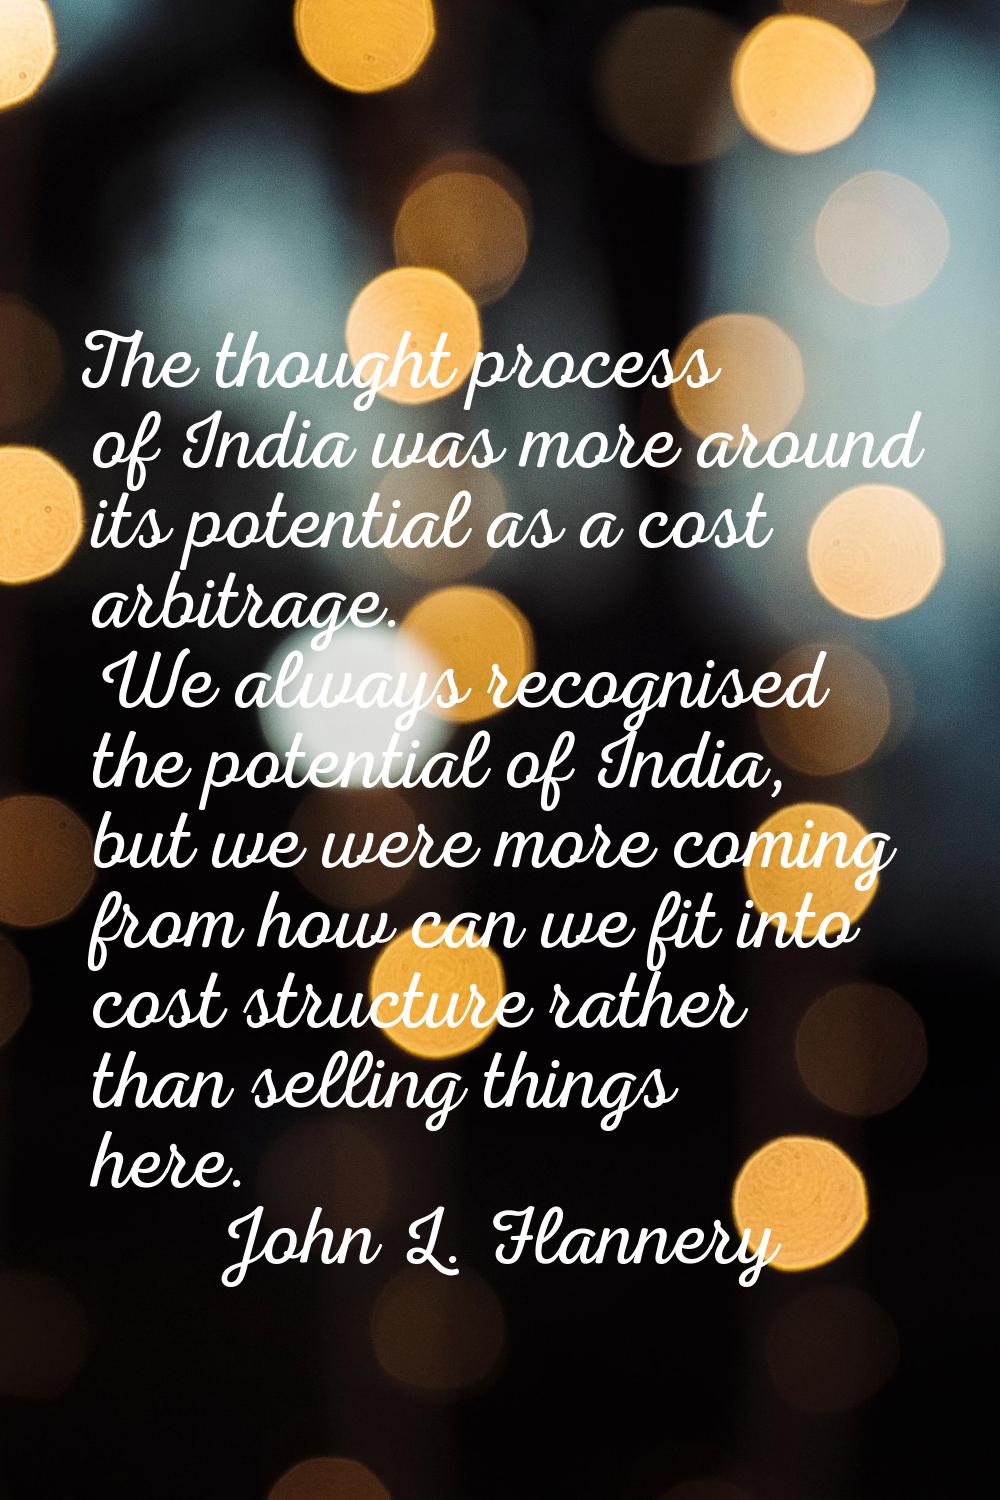 The thought process of India was more around its potential as a cost arbitrage. We always recognise